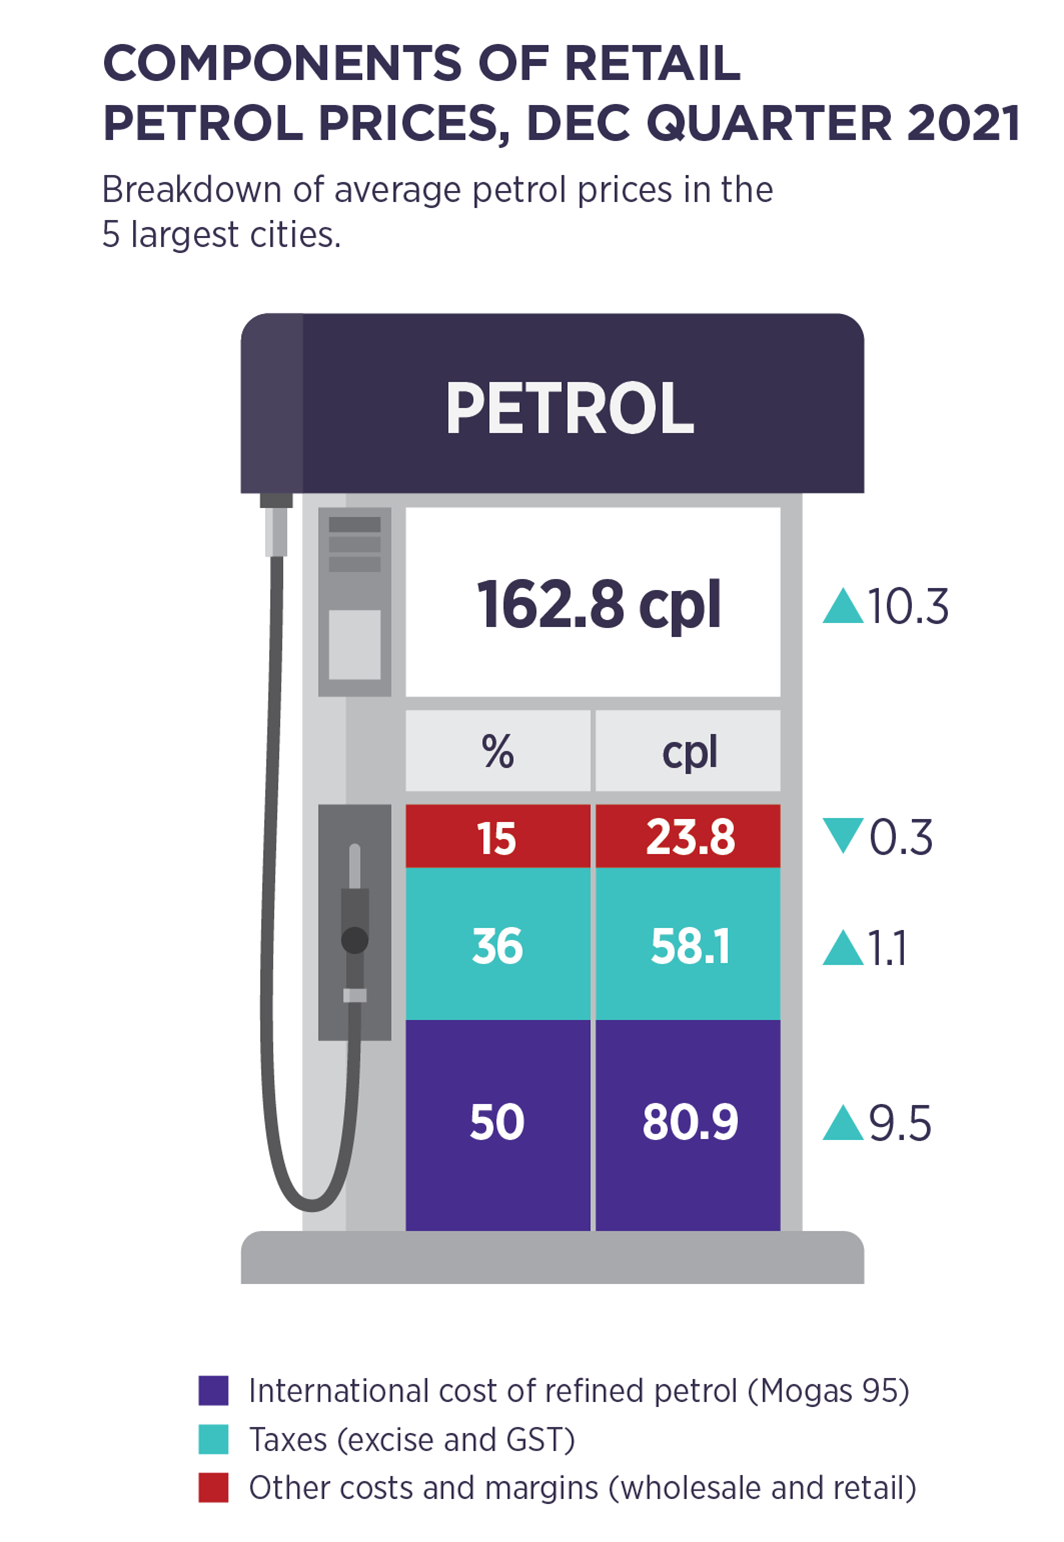 Components of retail petrol prices, December quarter 2021